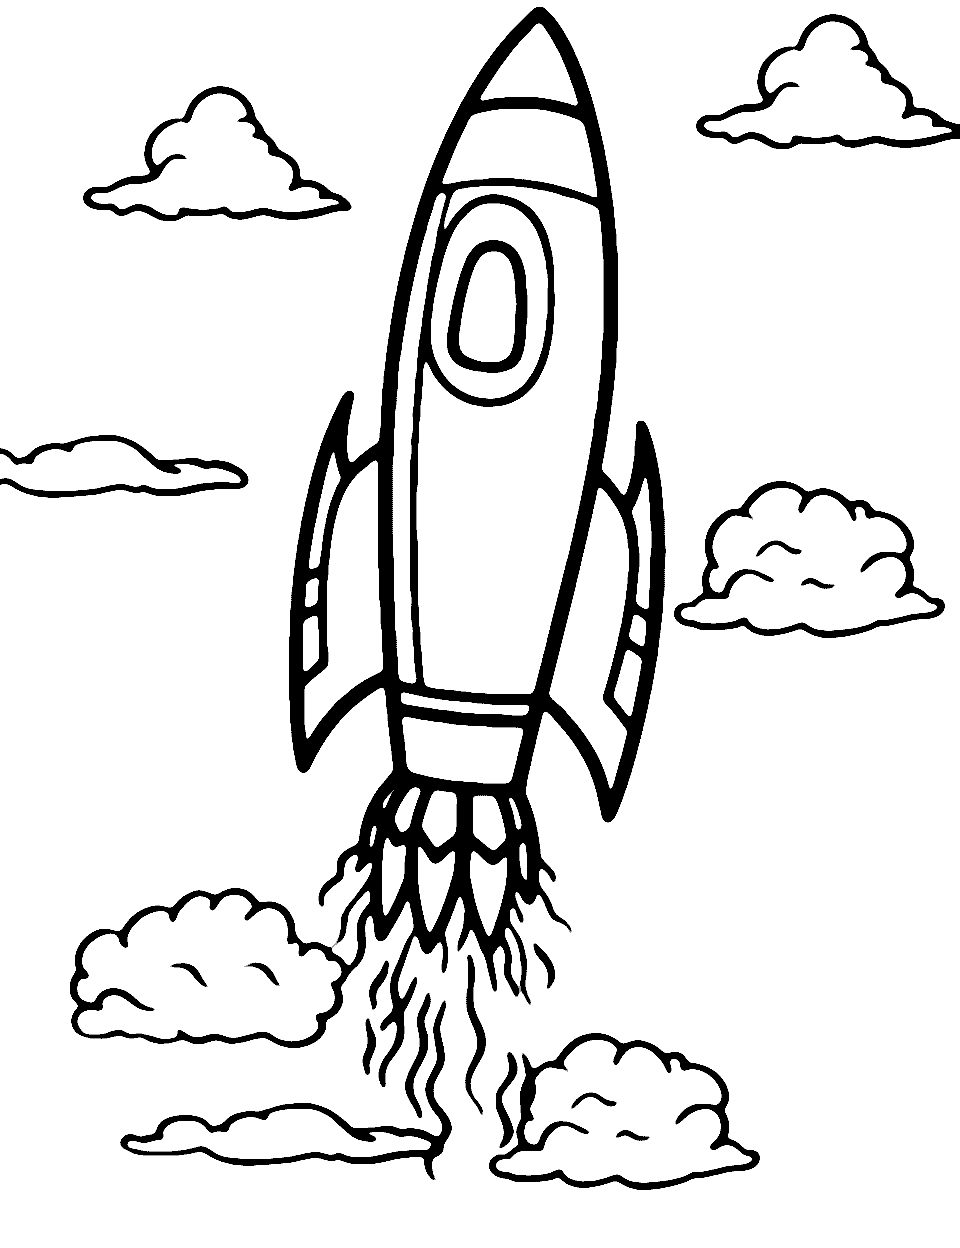 Rocket's Grand Launch Coloring Page - A towering rocket blasting off with flames and smoke trailing behind.